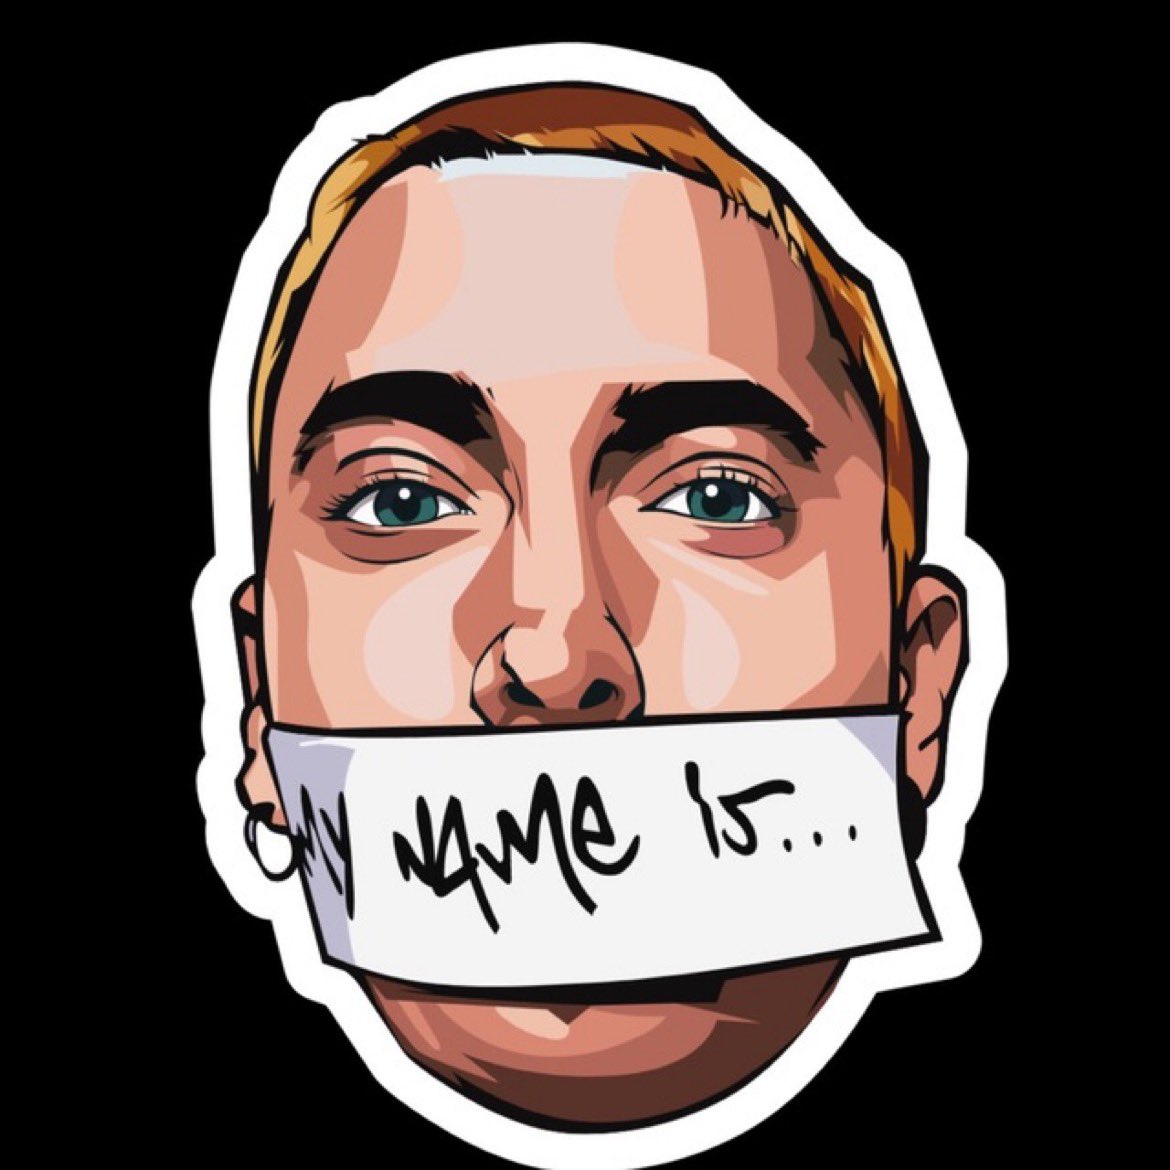 And the community of $EMINEM is here for all of it.  Guess who’s back?  #ENINEM #THEDEATHOFSLIMSHADY #CRYPTO #FANFI #DEFI #TEAMSHADY #GUESSWHOSBACK 

dextools.io/app/en/ether/p…